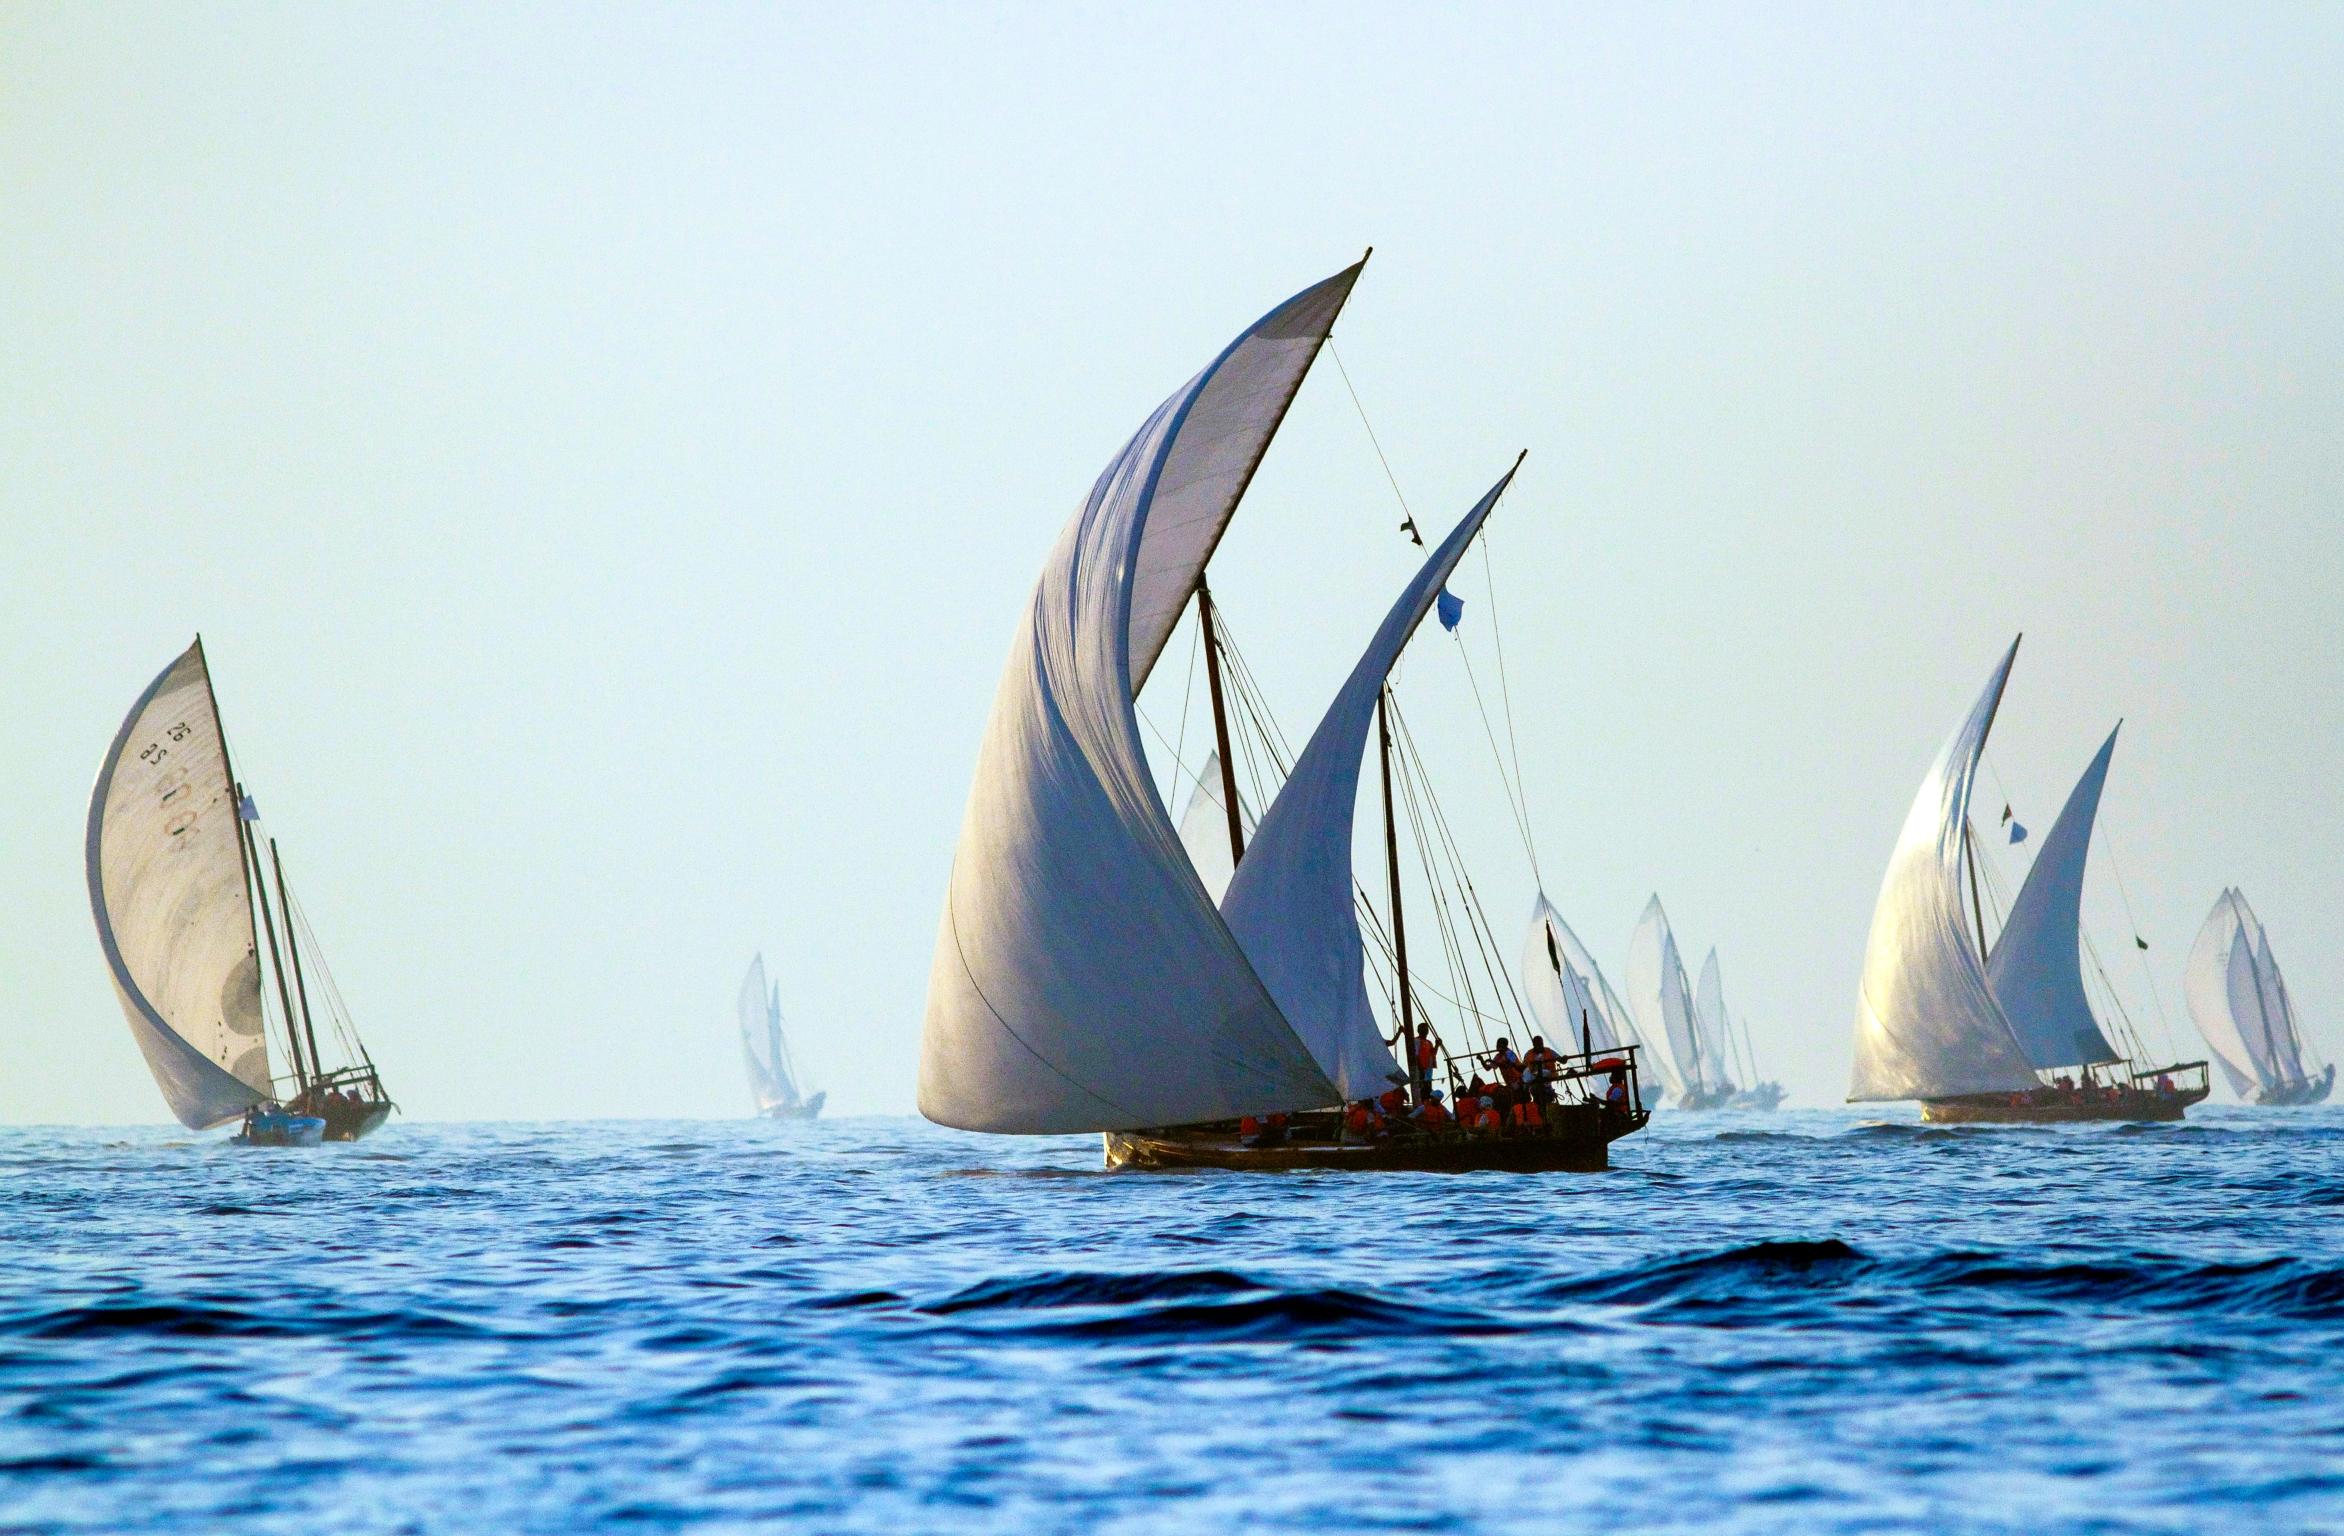 Inspiration
The Dhow family of furniture references the billowing sails of traditional Omani boats. 
an important part of the seafaring nation’s maritime history.

Craft
Bethan has reimagined the movement of the sails in a hand-drawn pattern,